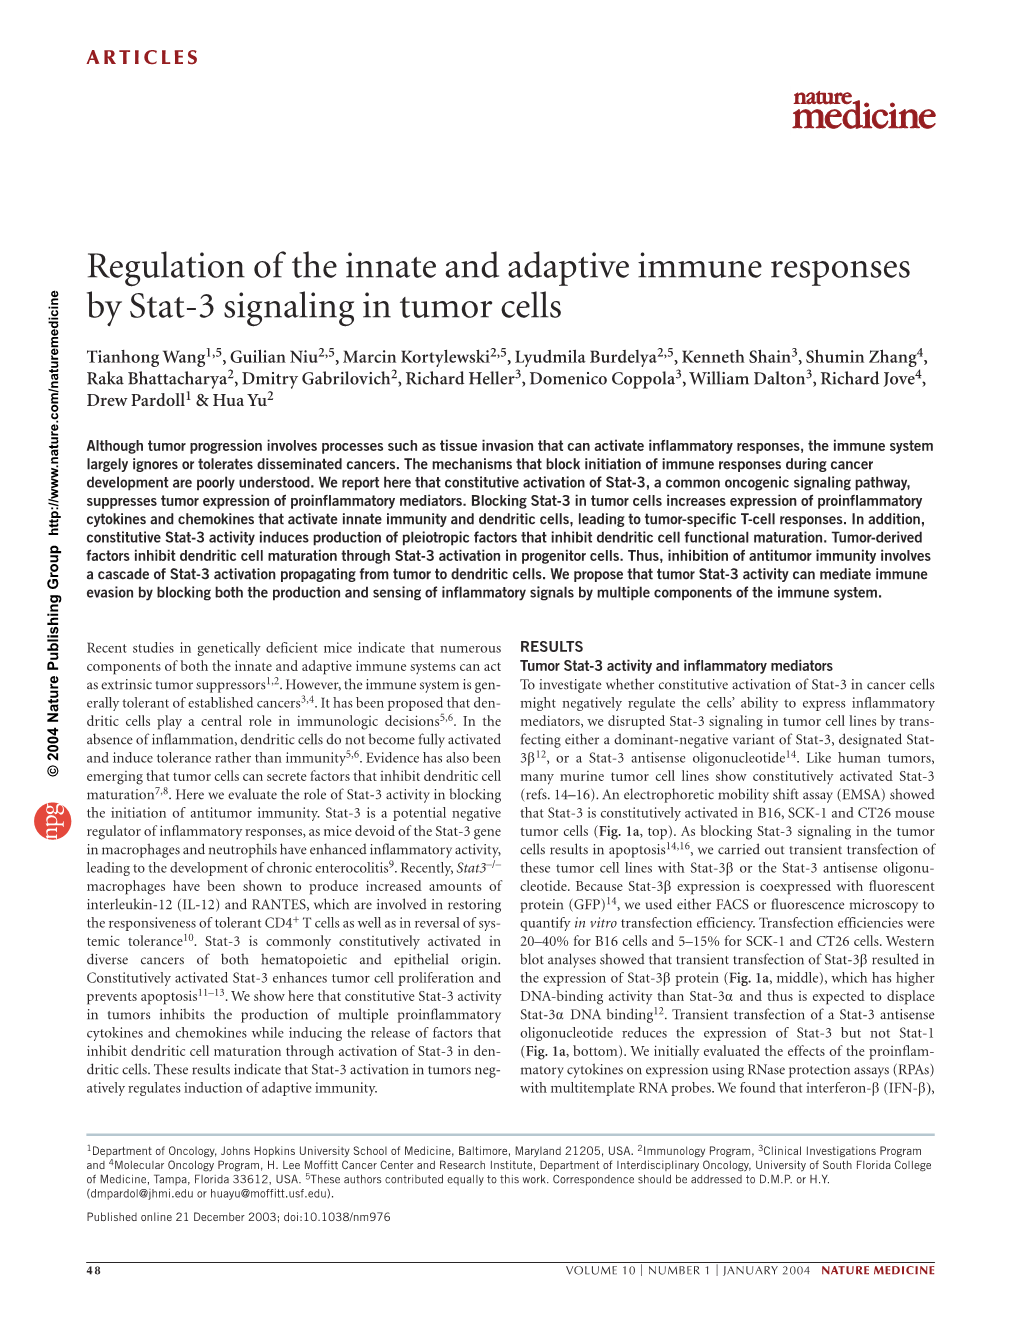 Regulation of the Innate and Adaptive Immune Responses by Stat-3 Signaling in Tumor Cells